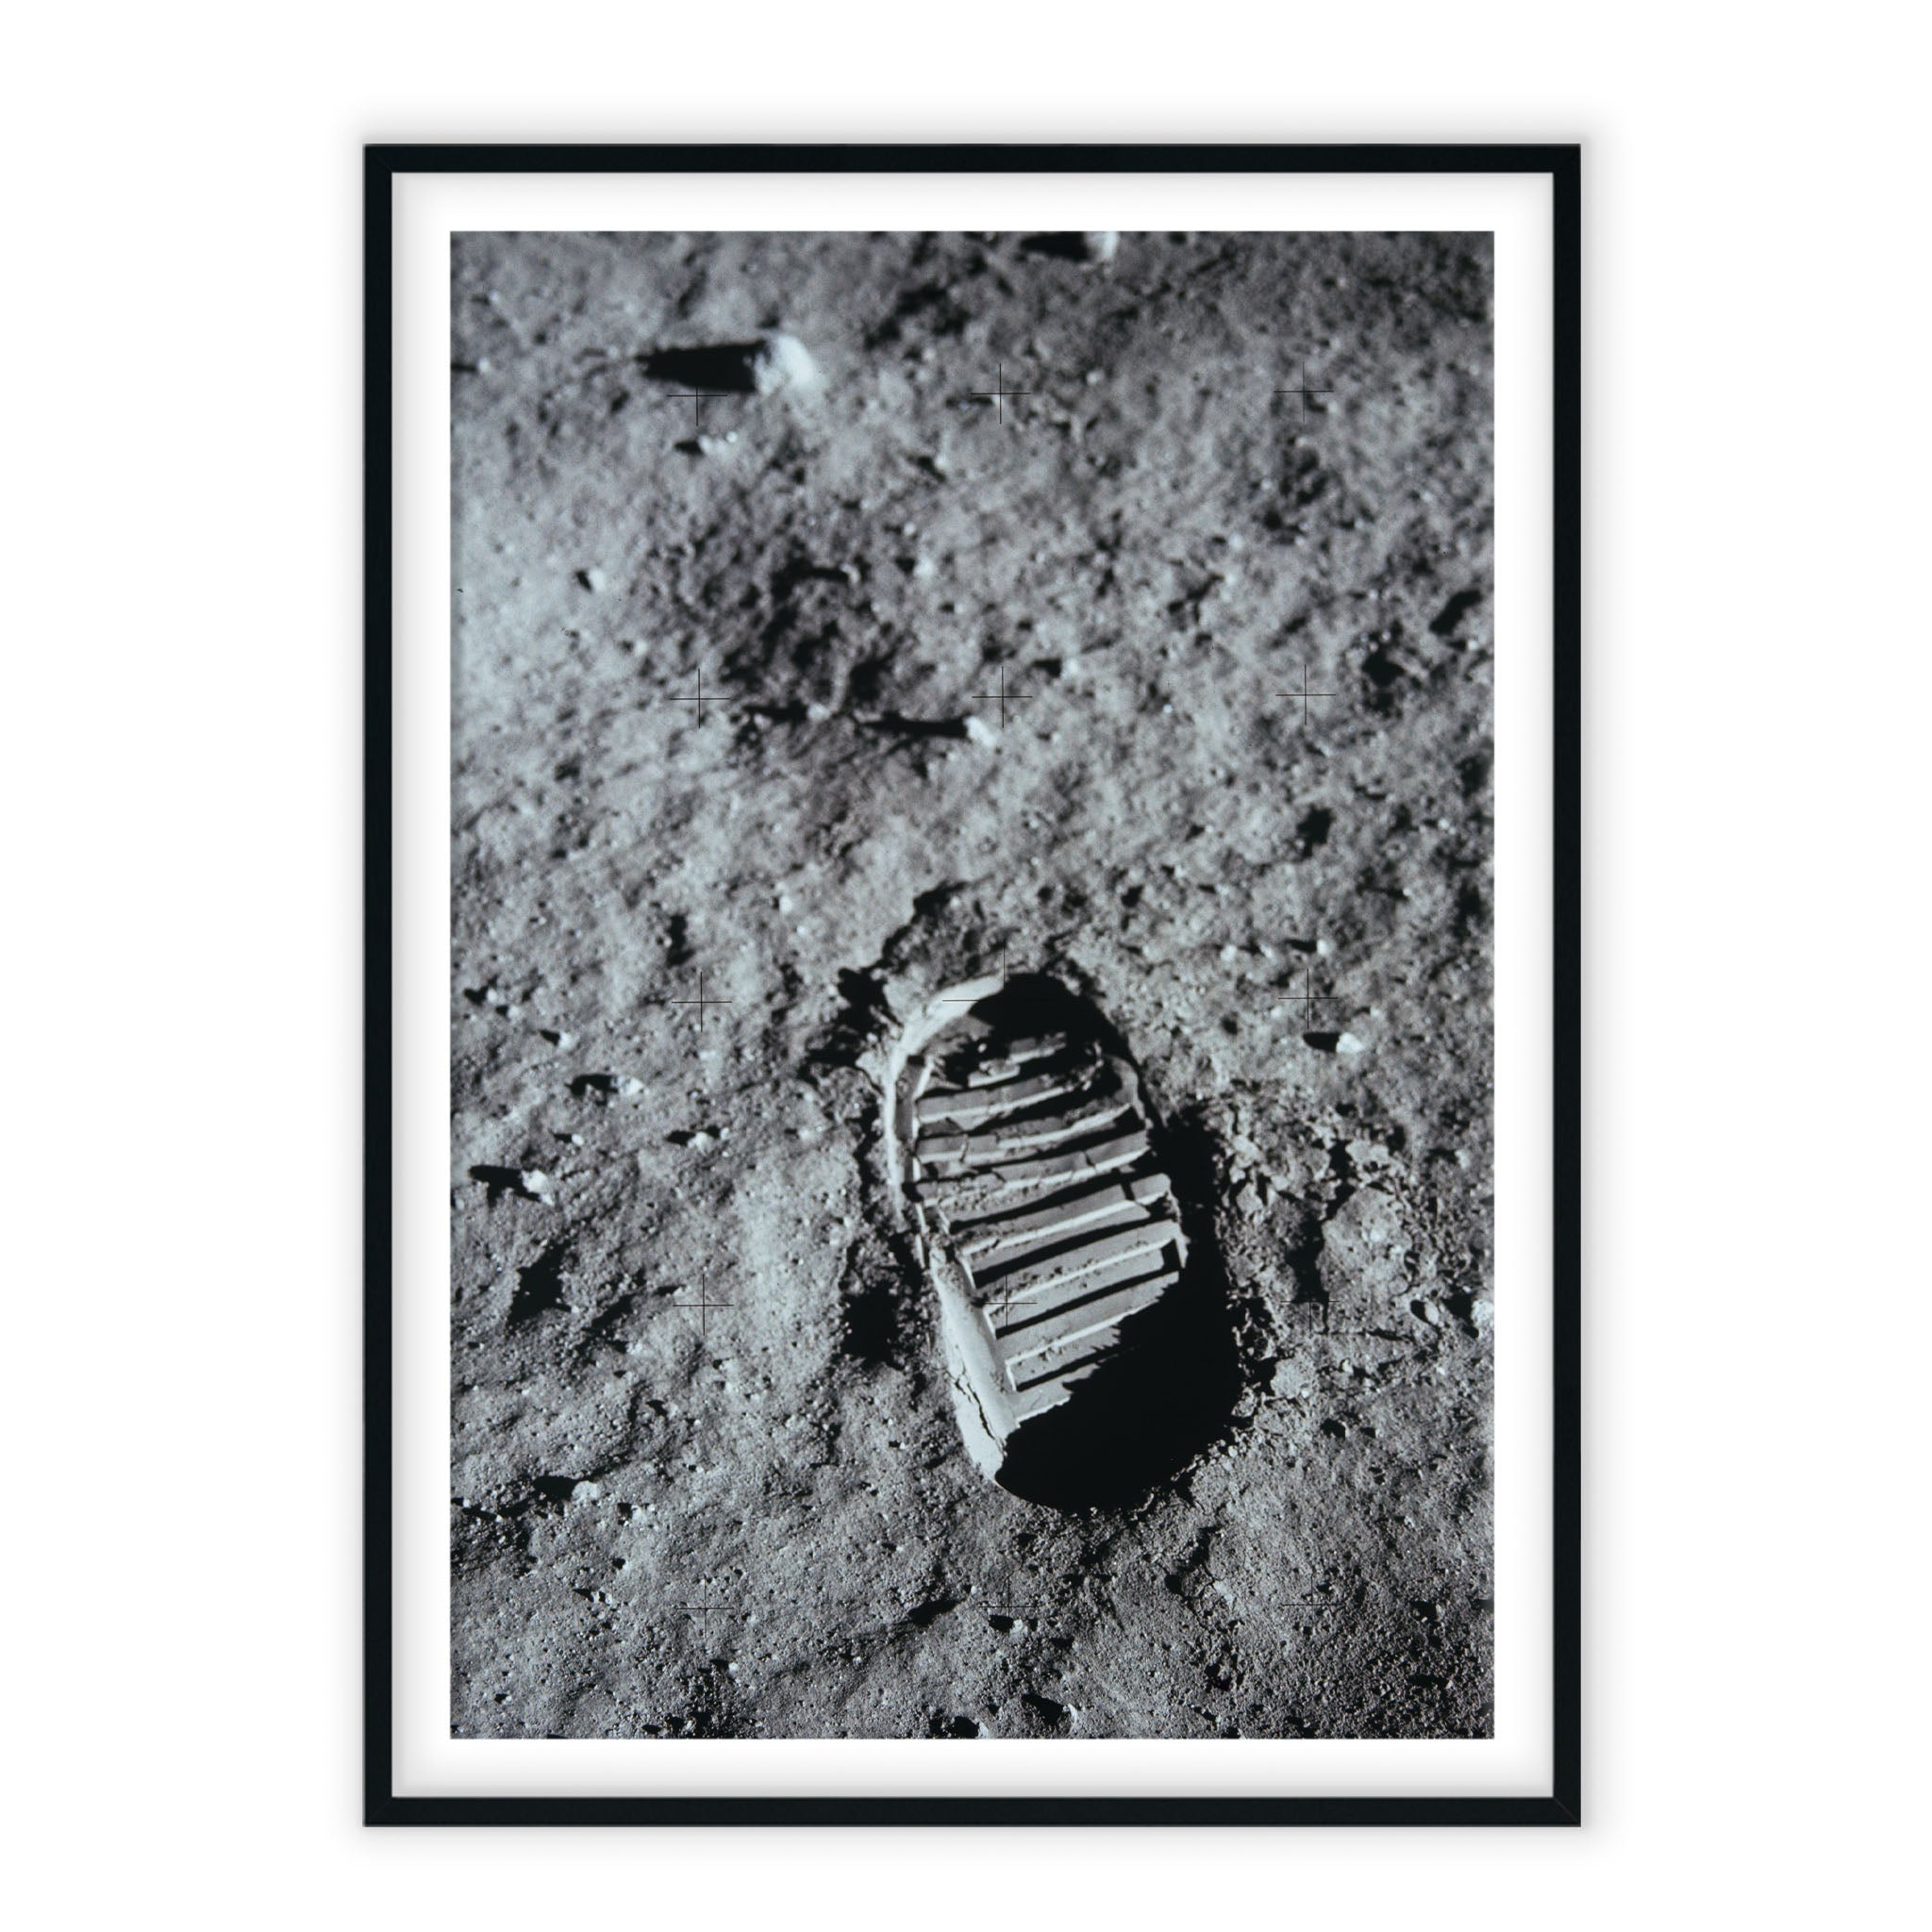 First Step on the Moon